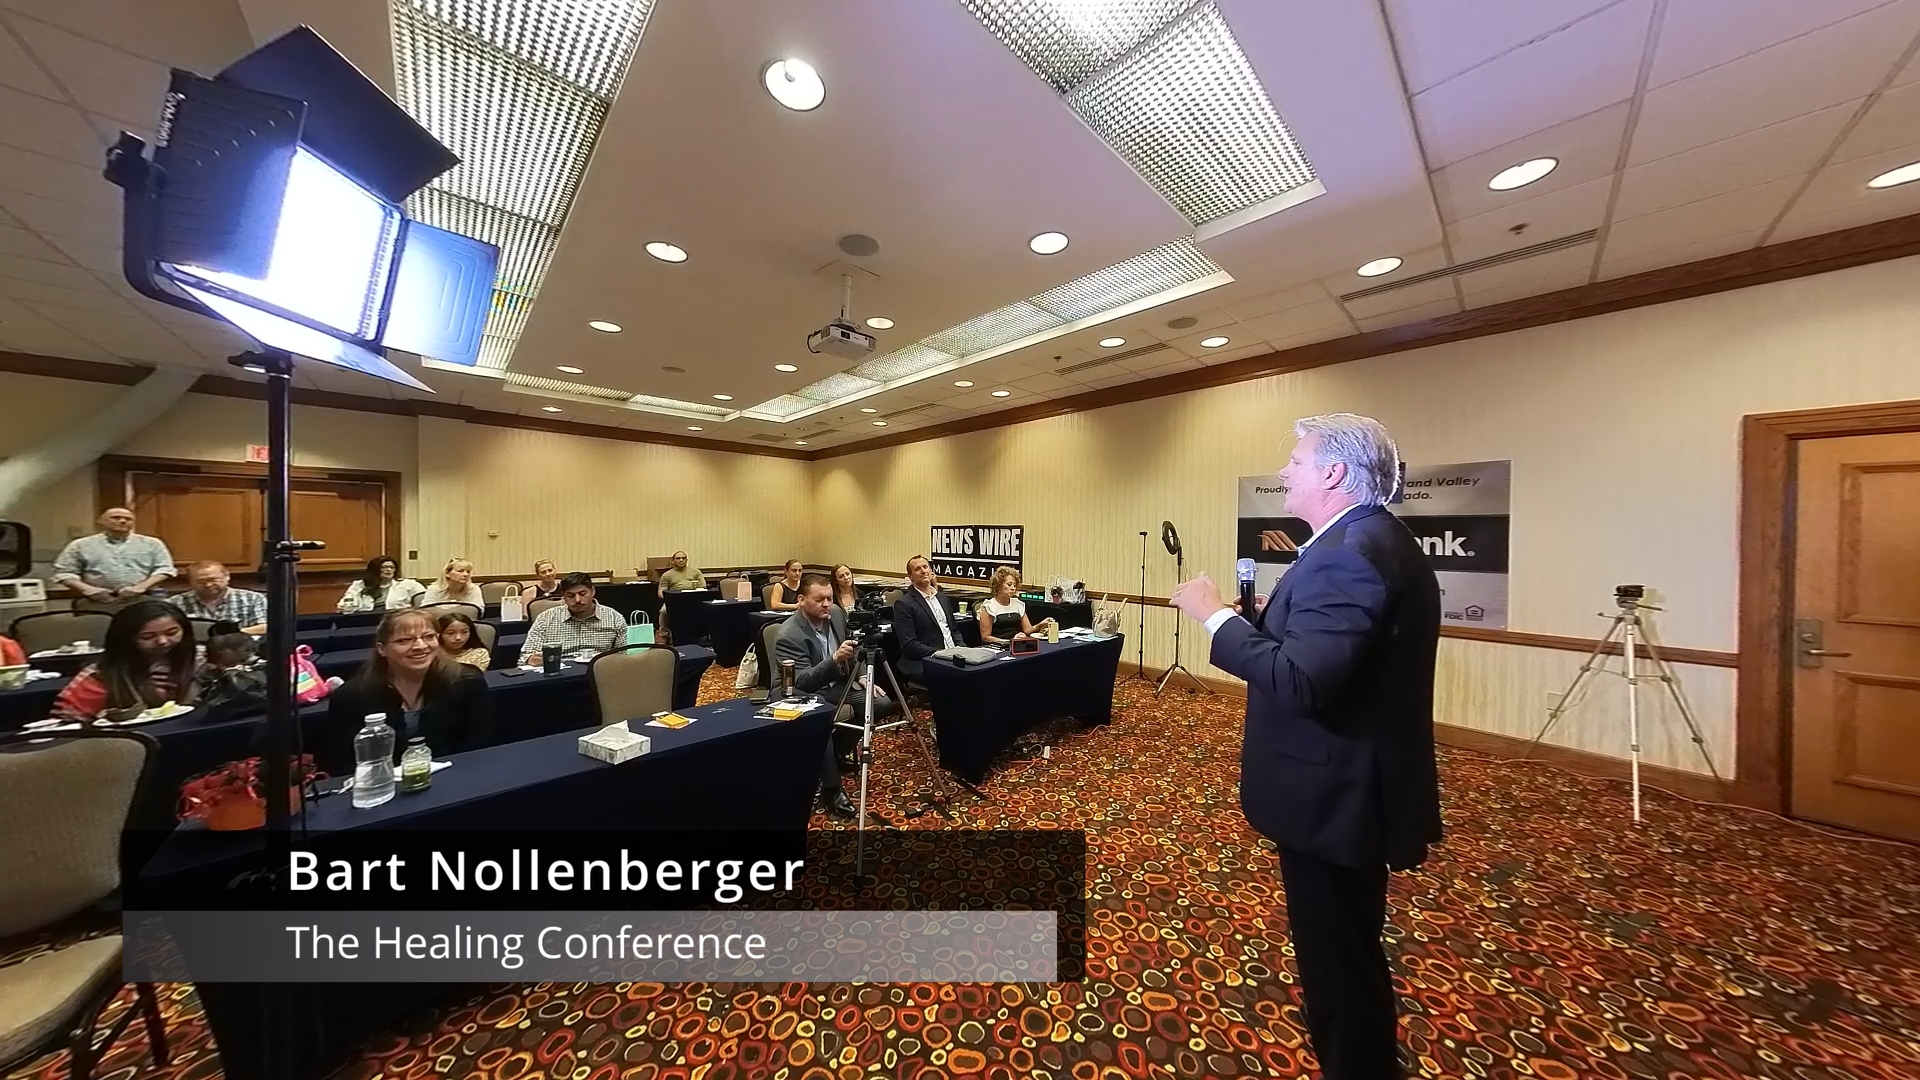 Bart Nollenberger speaking at the Healing Conference